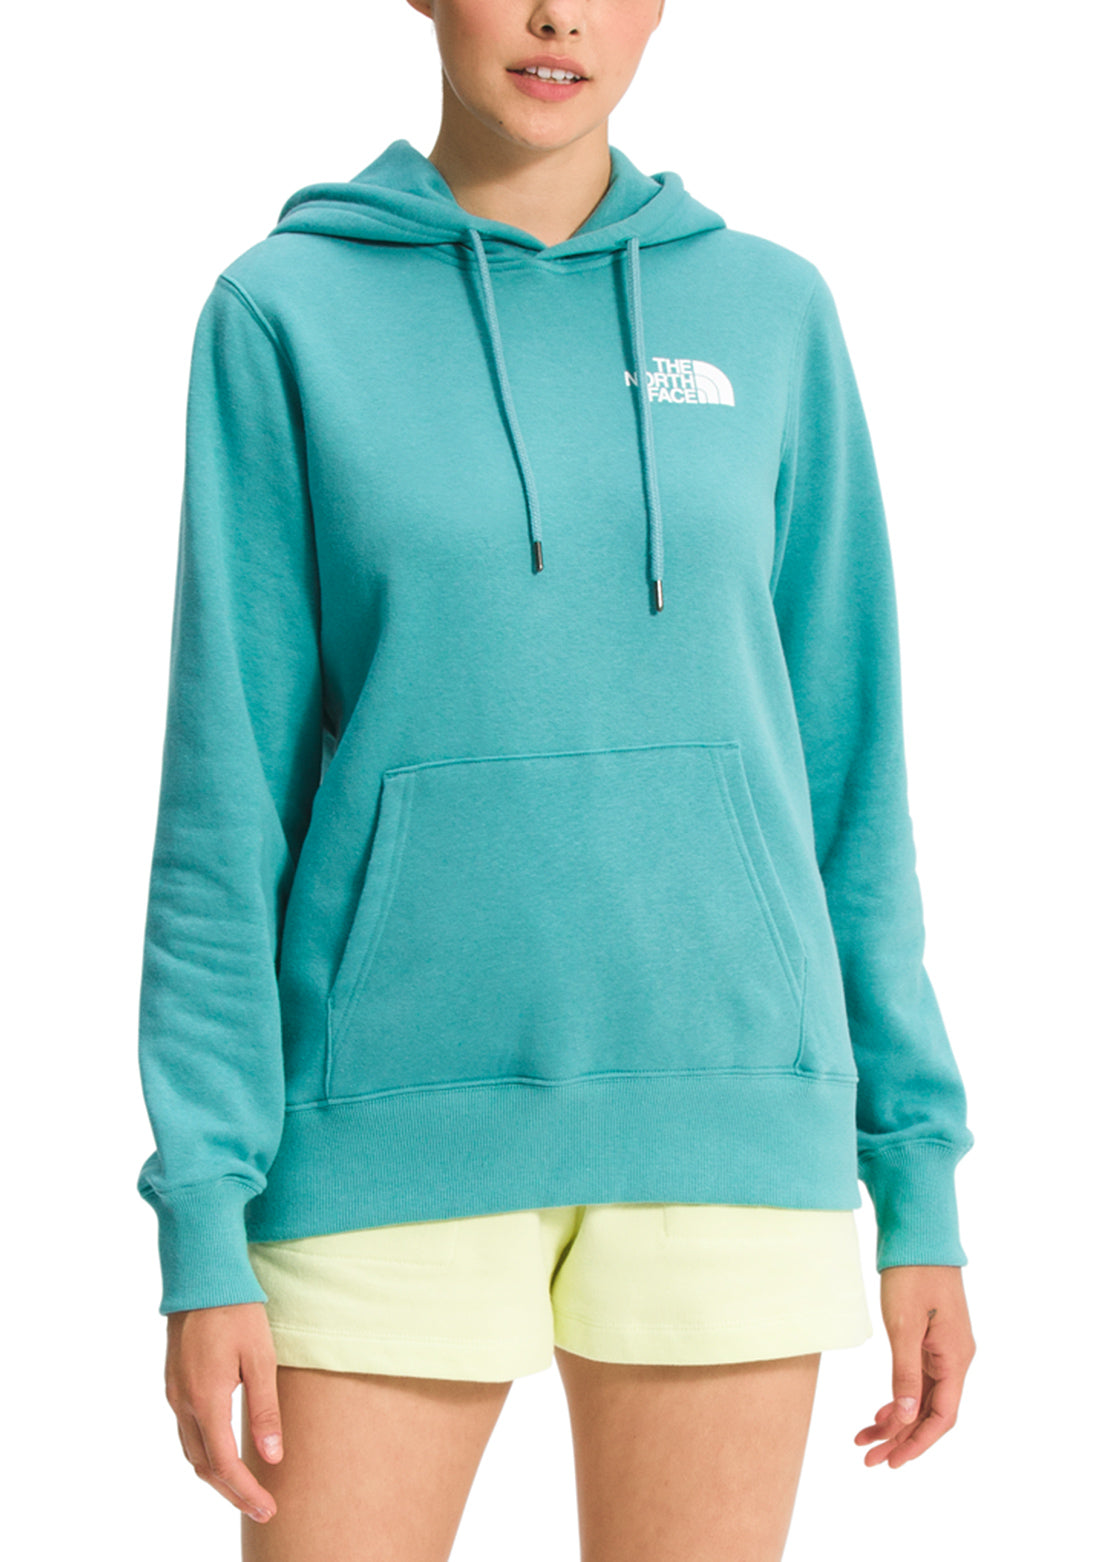 The North Face Women's Box NSE Pullover Hoodie - PRFO Sports